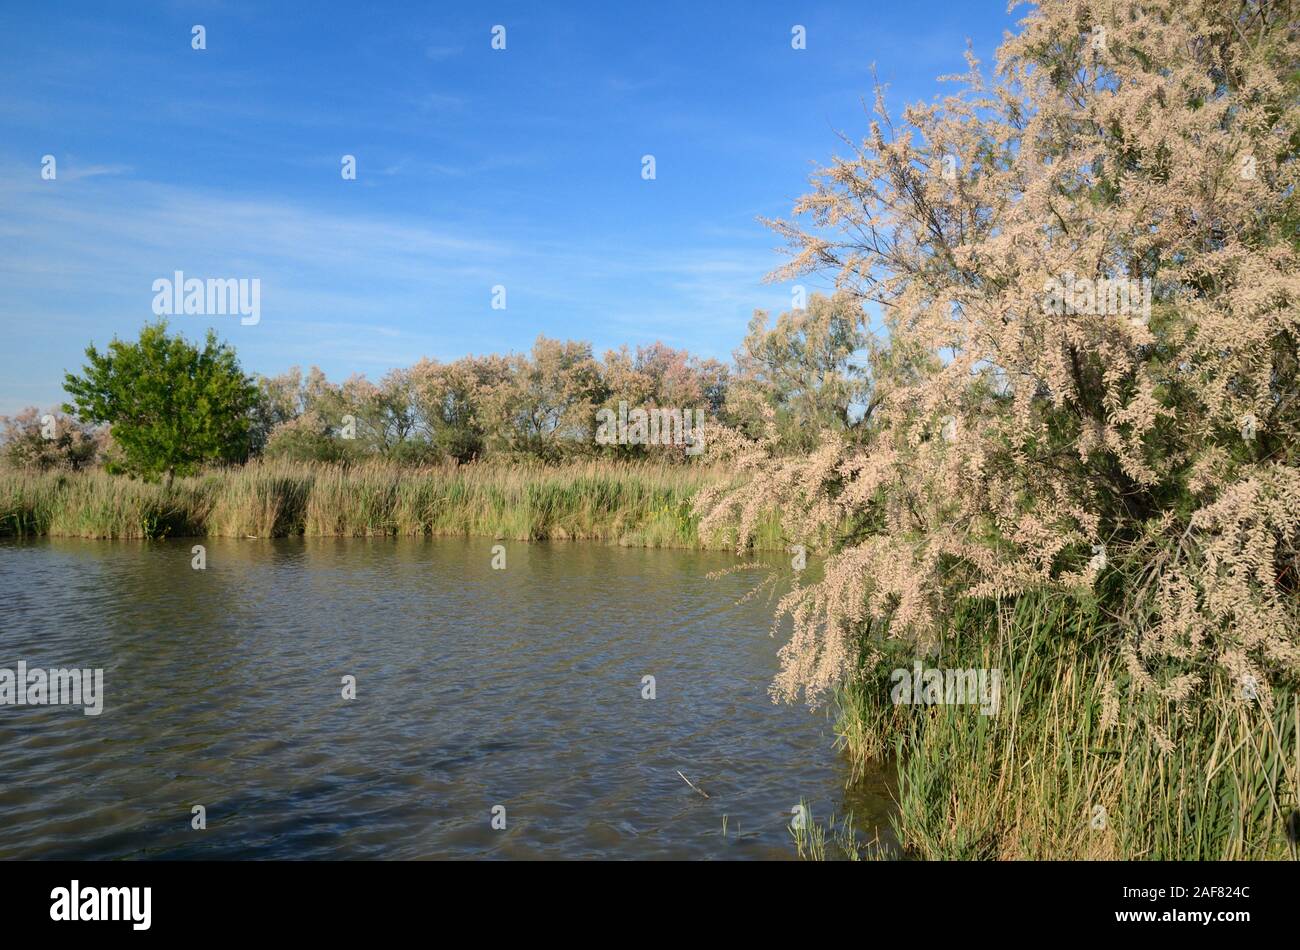 Vaccarès Lake, Wetland, Marsh & Reedbeds Surrounded by Flowering Tamarisk Trees, Tamarix gallica, in Camargue Wetlands Nature Reserve Provence France Stock Photo